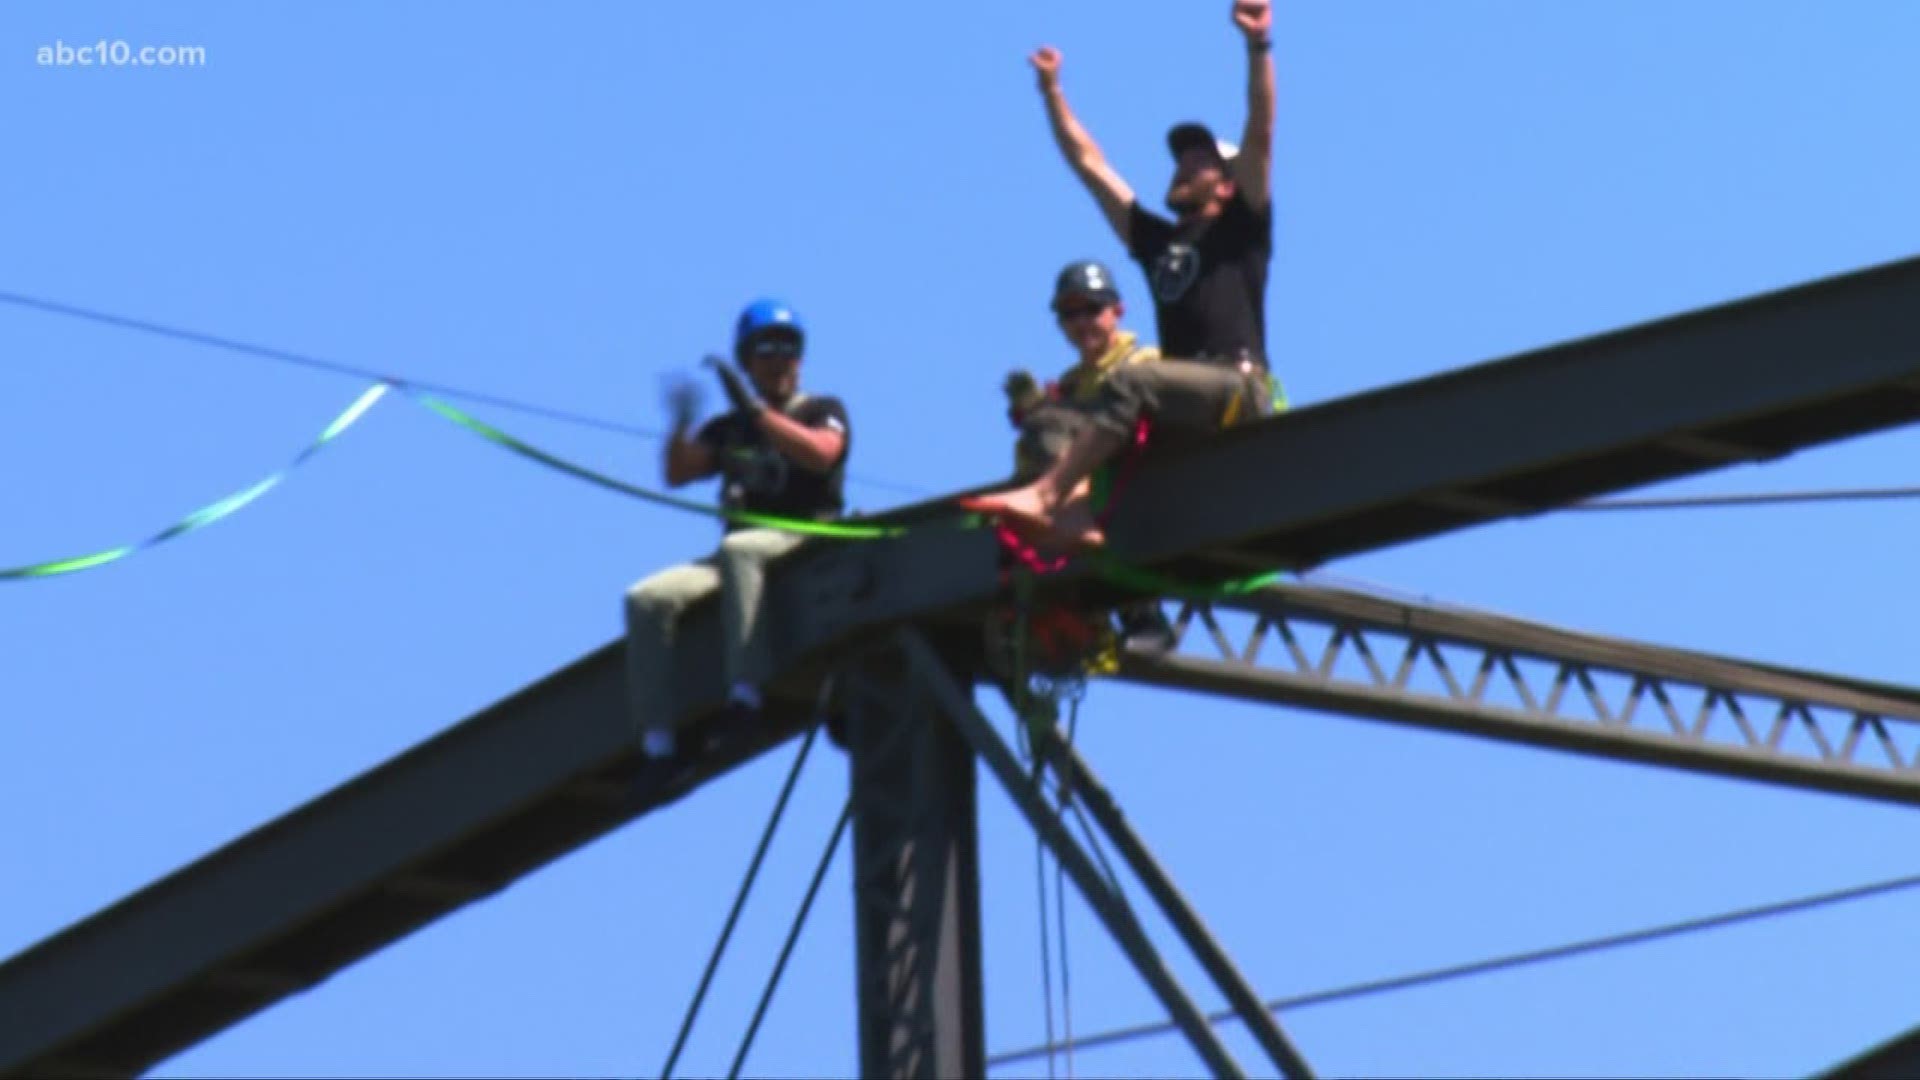 ABC10's Jeremy Flint was there as Folsom native Ryan Robinson complete a 1,919-foot slackline walk across the American River. Robinson slacklined from Natomas Crossing to top of the City's Historic Truss Bridge.